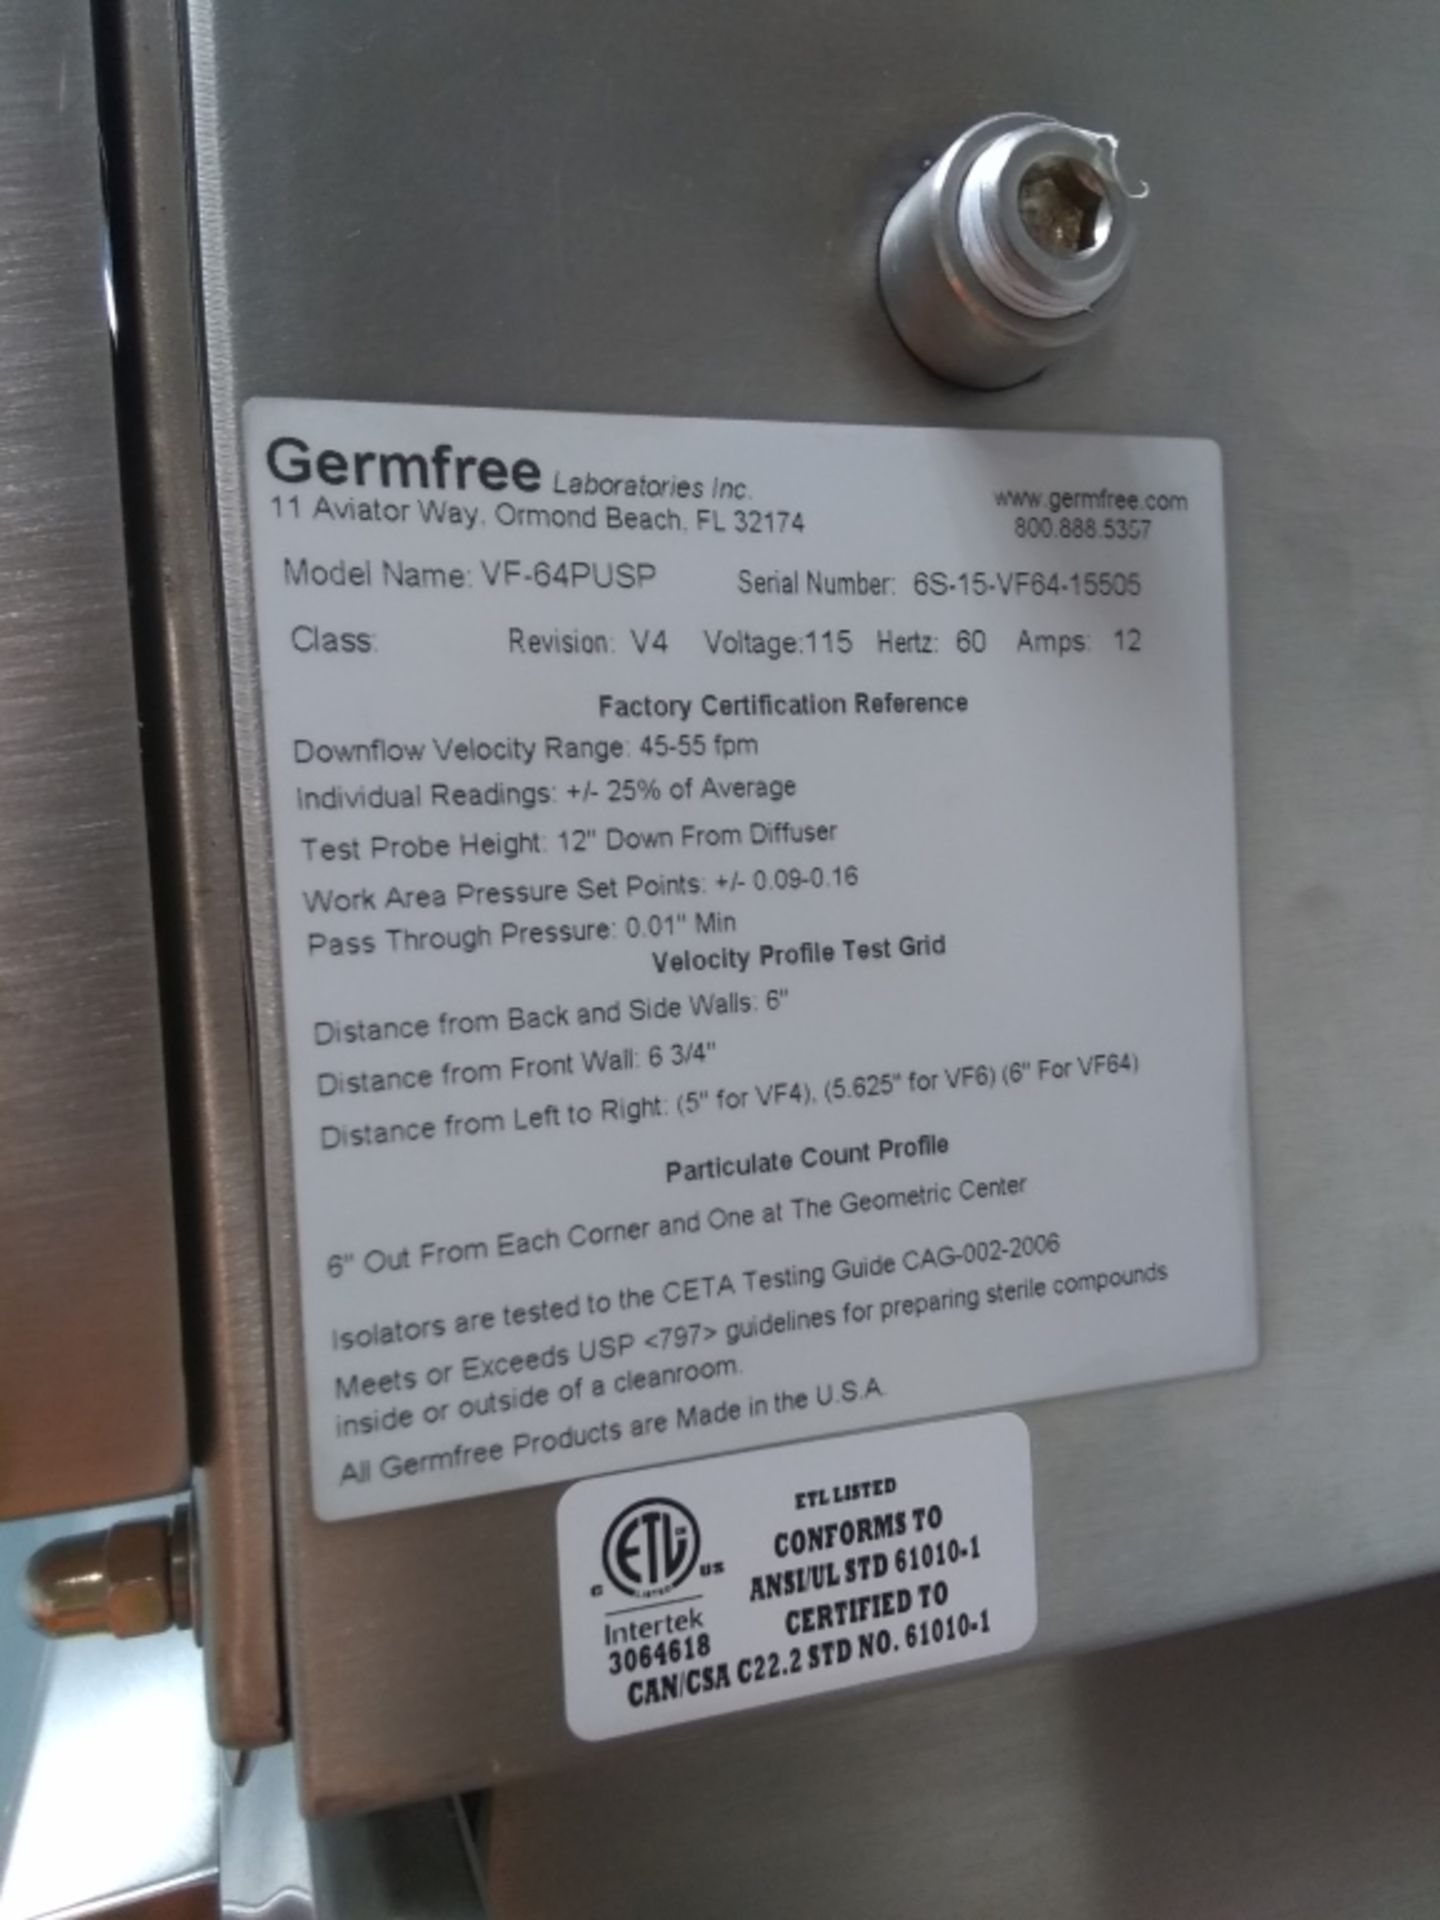 Germfree Labs Stainless Steel Compounding Aseptic Isolator - Image 3 of 4